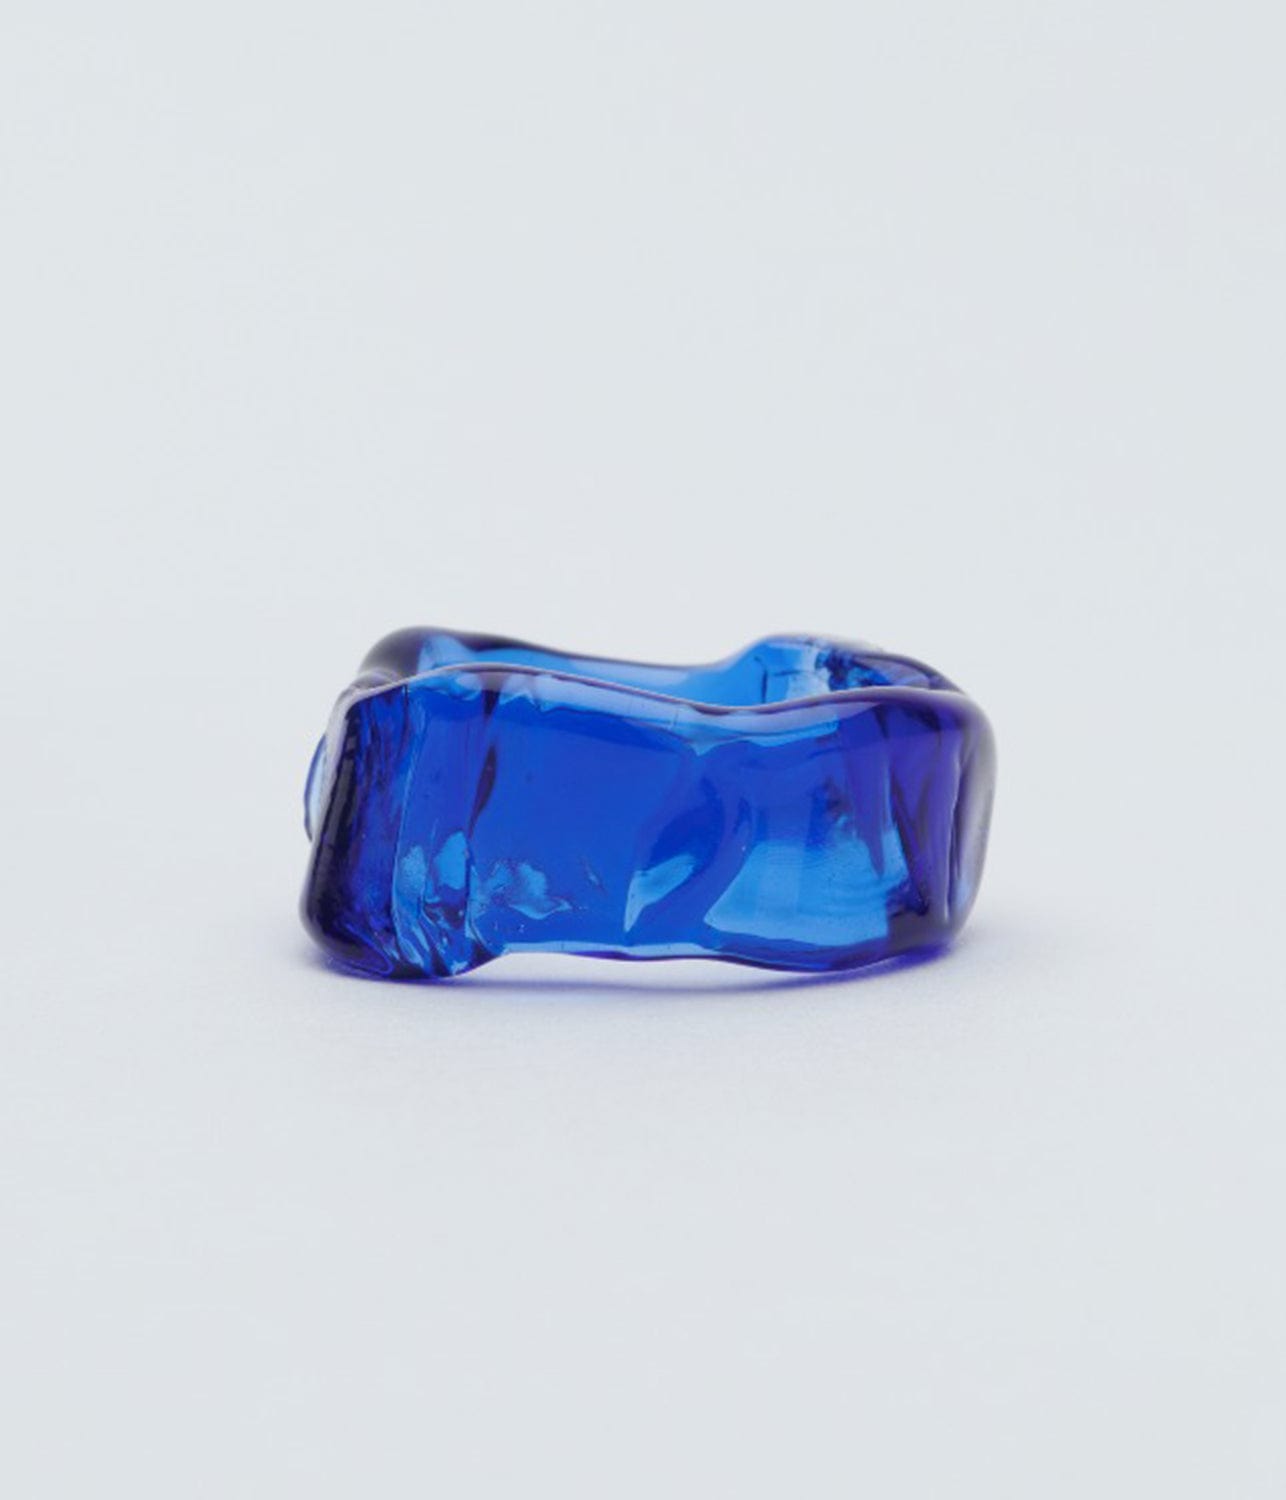 ISIS RING- BLUE | LEVENS | LEVENS ISIS RING- BLUE